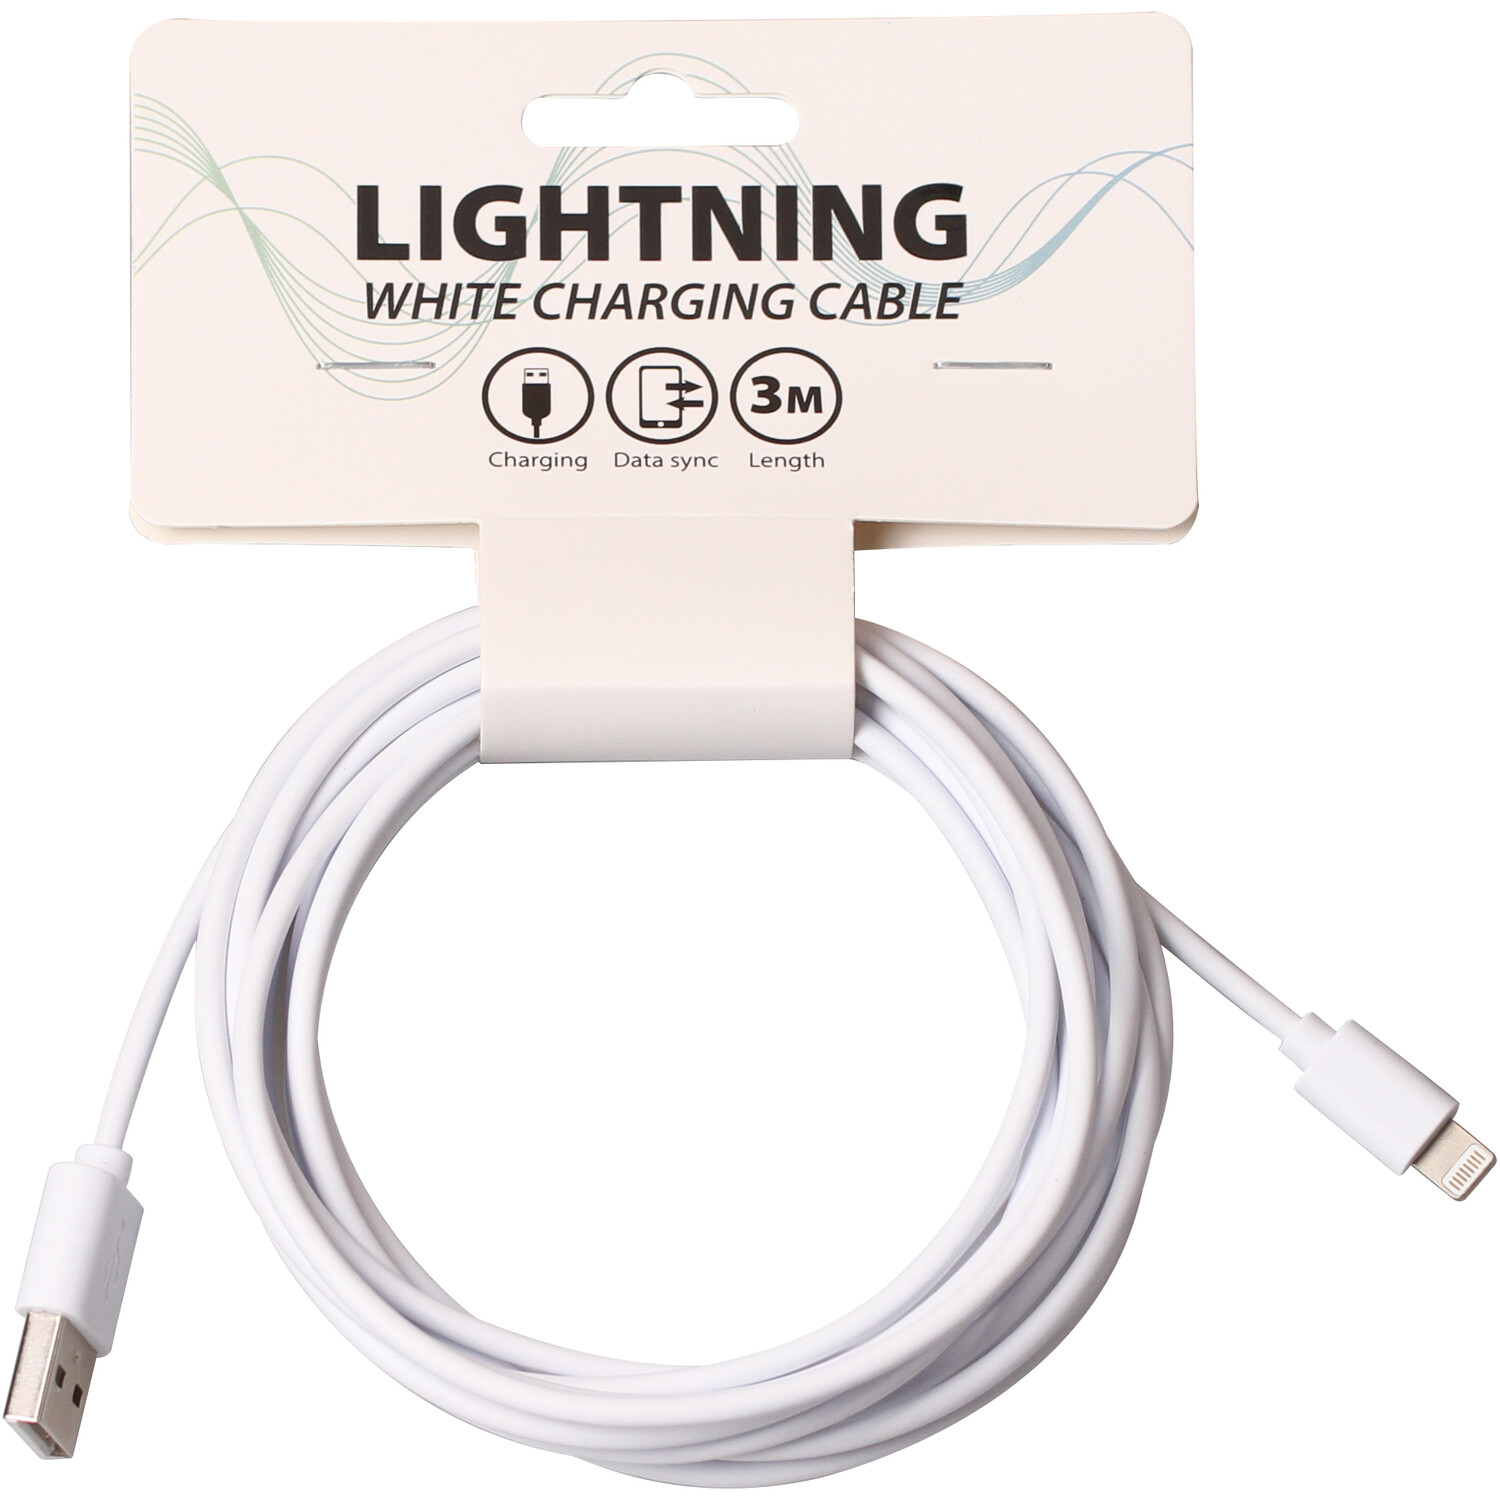 Lightning White Charging Cable 3m Image